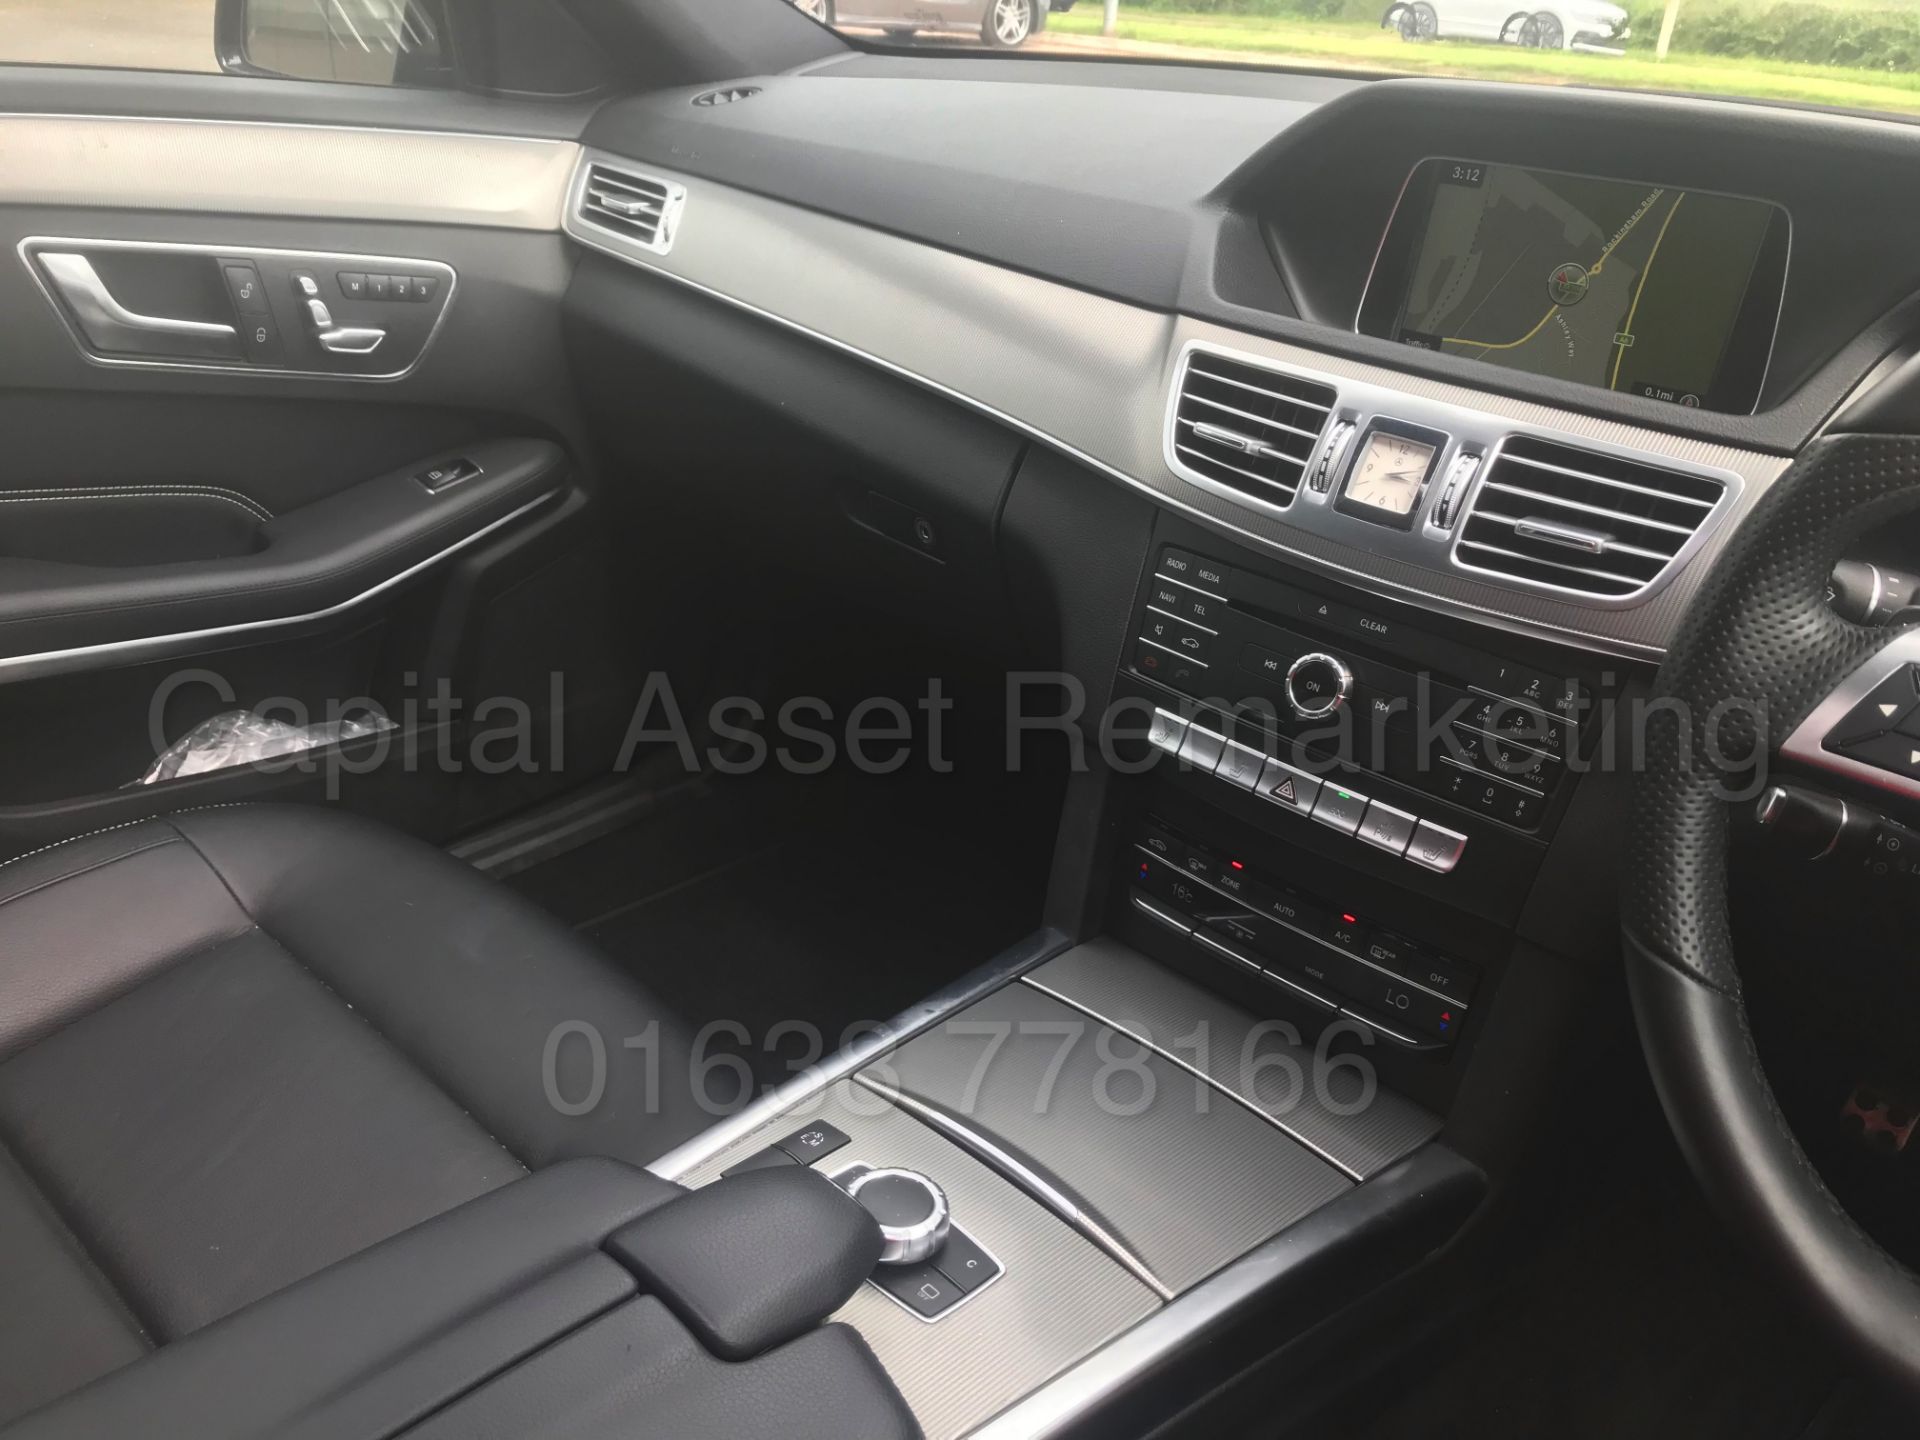 (On Sale)MERCEDES-BENZ E220D 'AMG NIGHT EDITION - PREMIUM' (2016) 'AUTO' - LEATHER - NAV - PAN ROOF* - Image 39 of 50